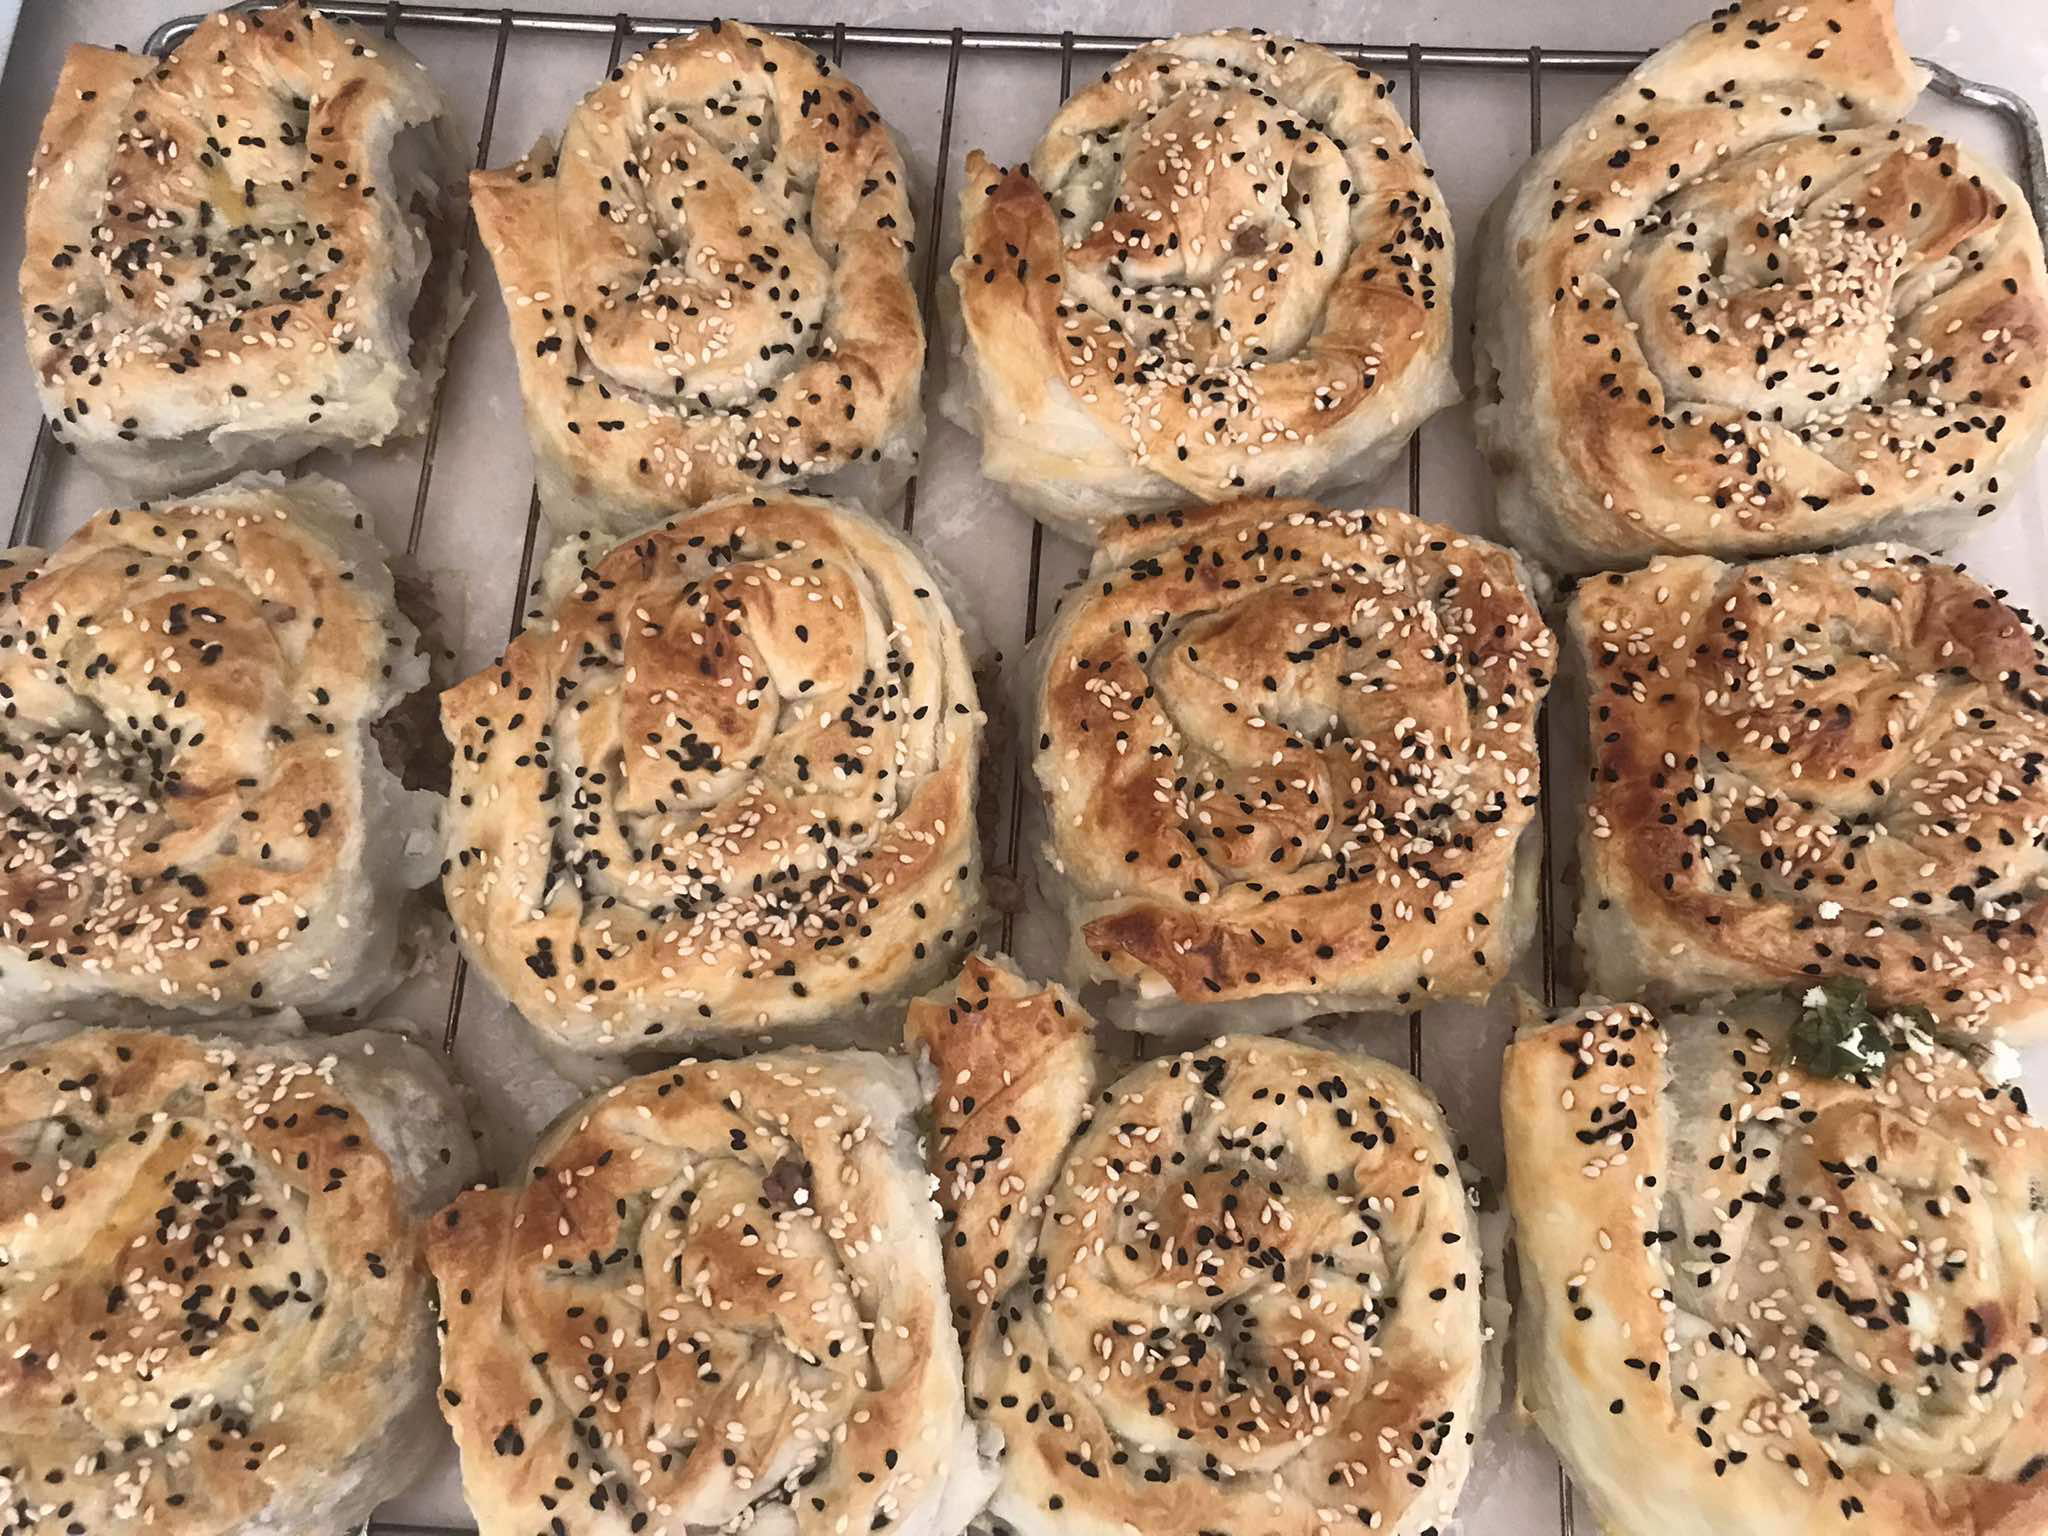 A tray of freshly baked pastry rolls, reminiscent of Turkish Borek, topped with black and white sesame seeds and arranged in a grid pattern.